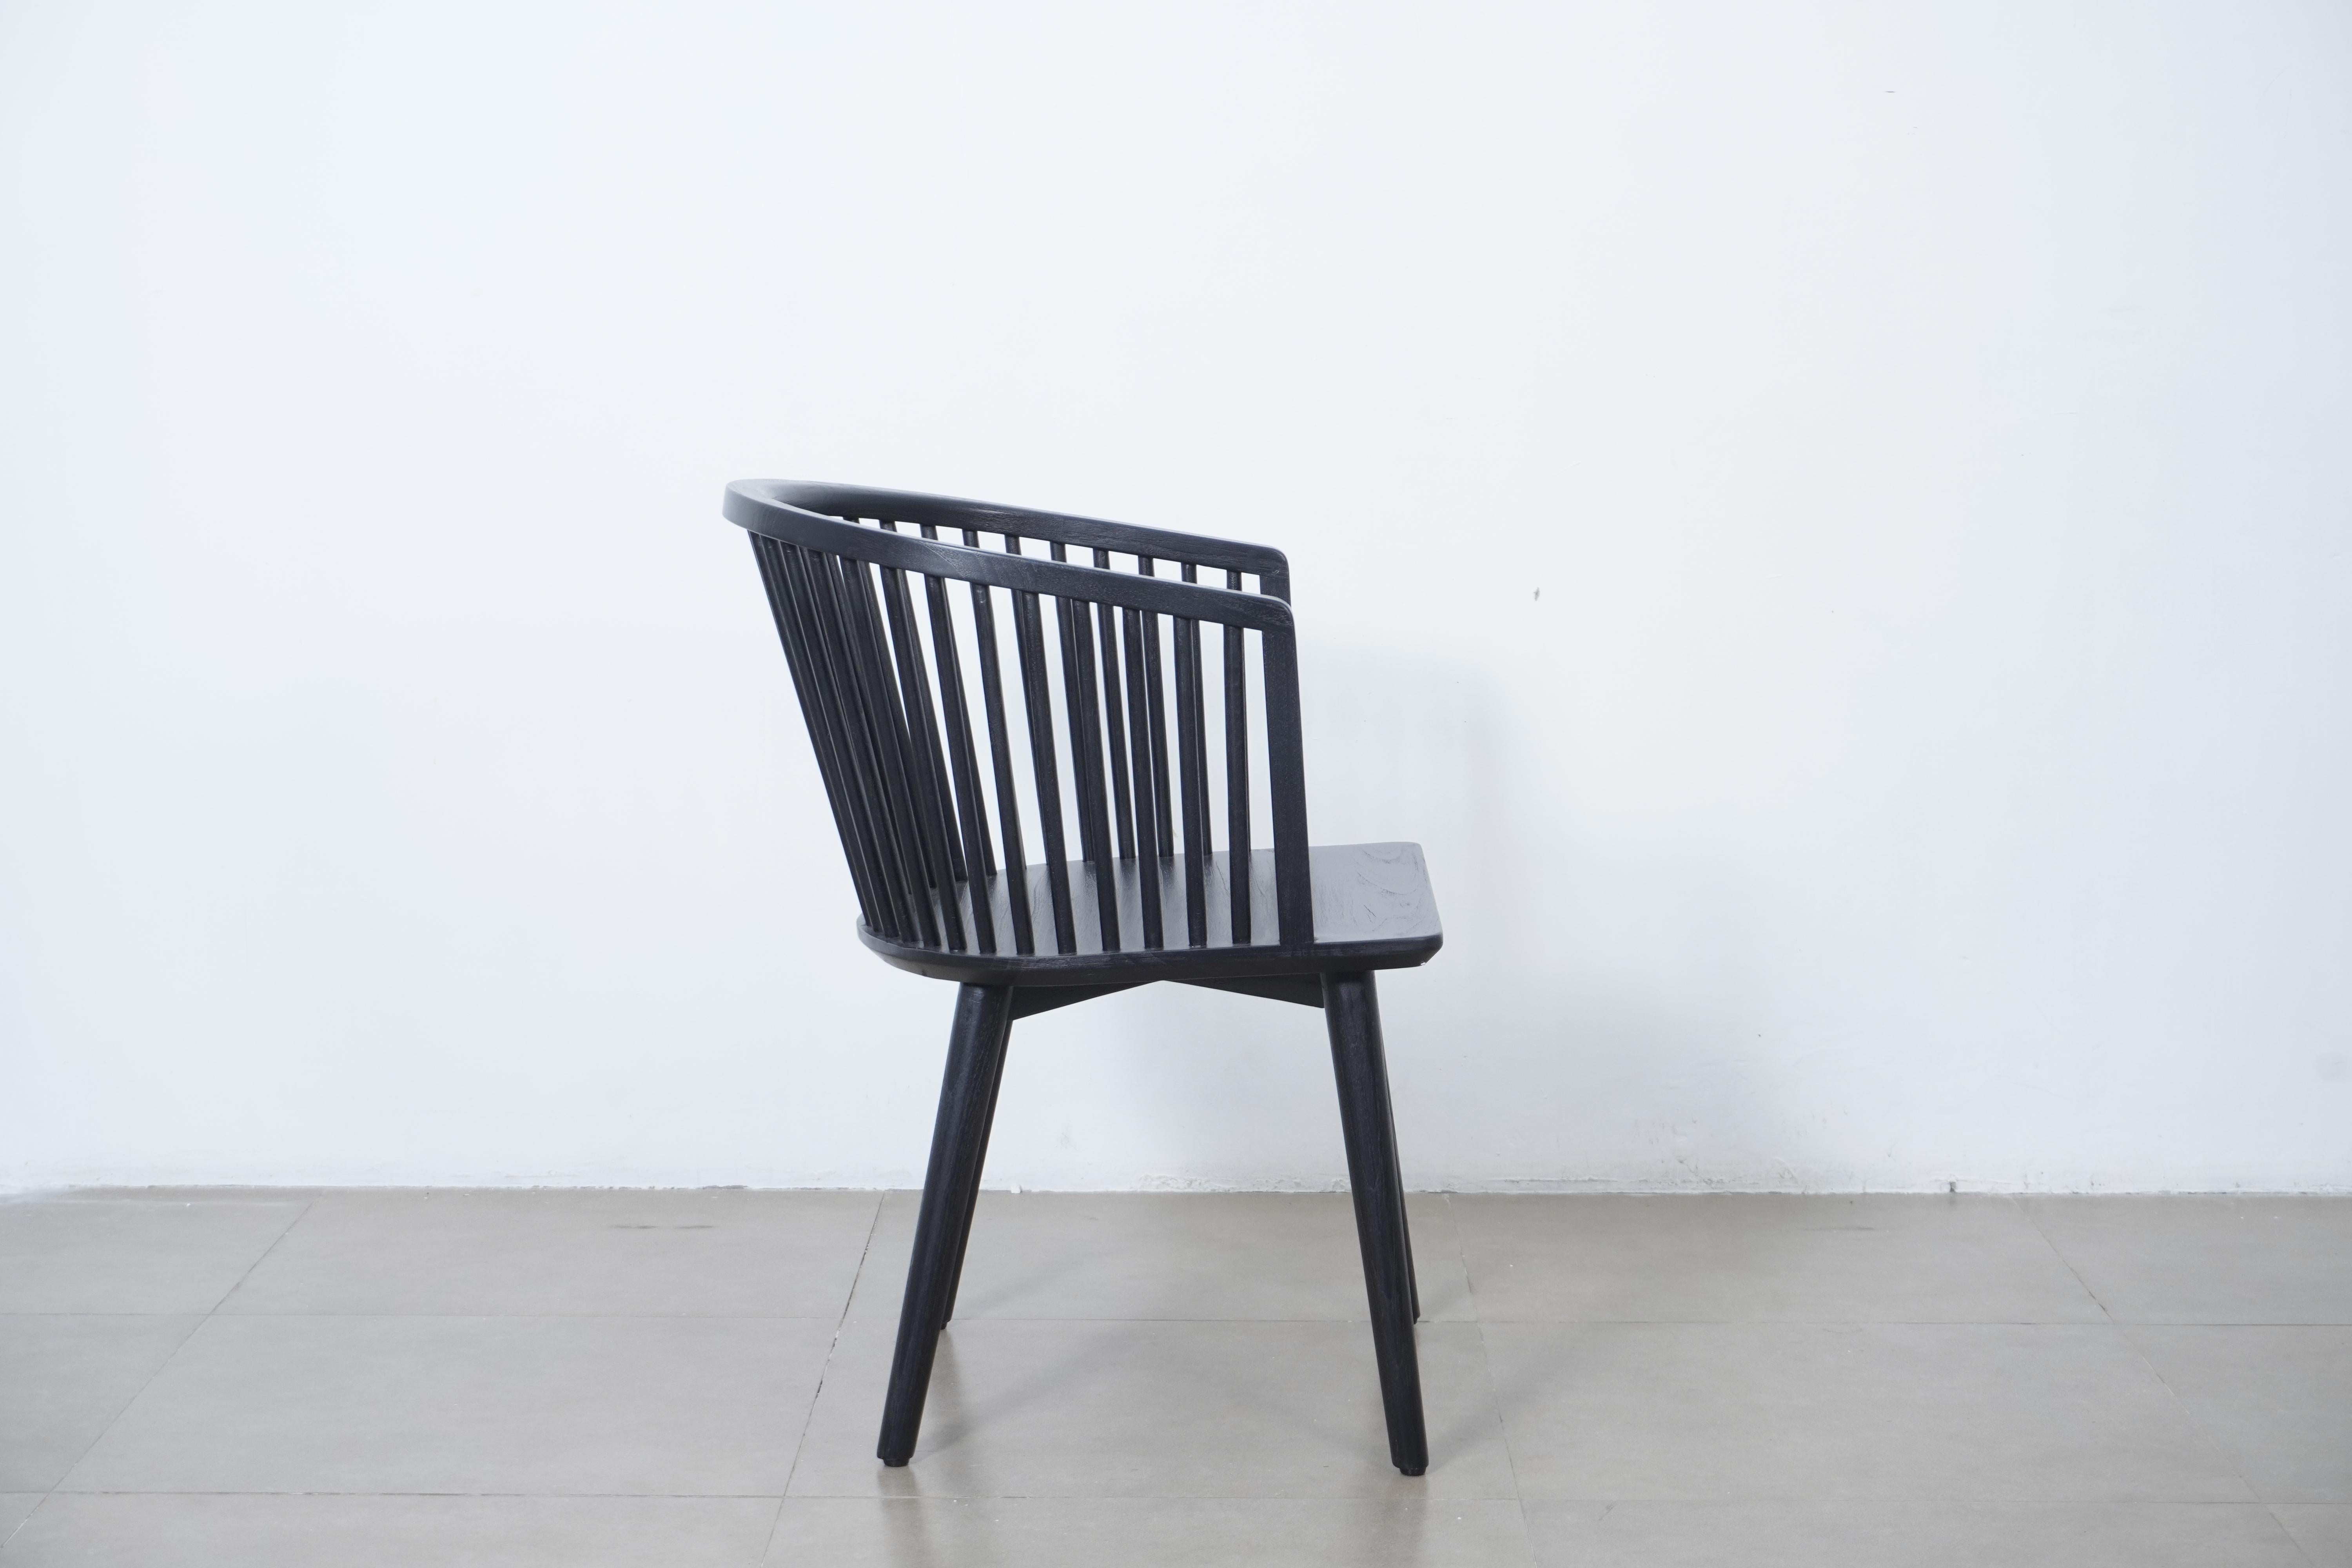 Modern Danish Peasant Dining Chair, Teak in Black Finish. Set of 6 chairs For Sale 2